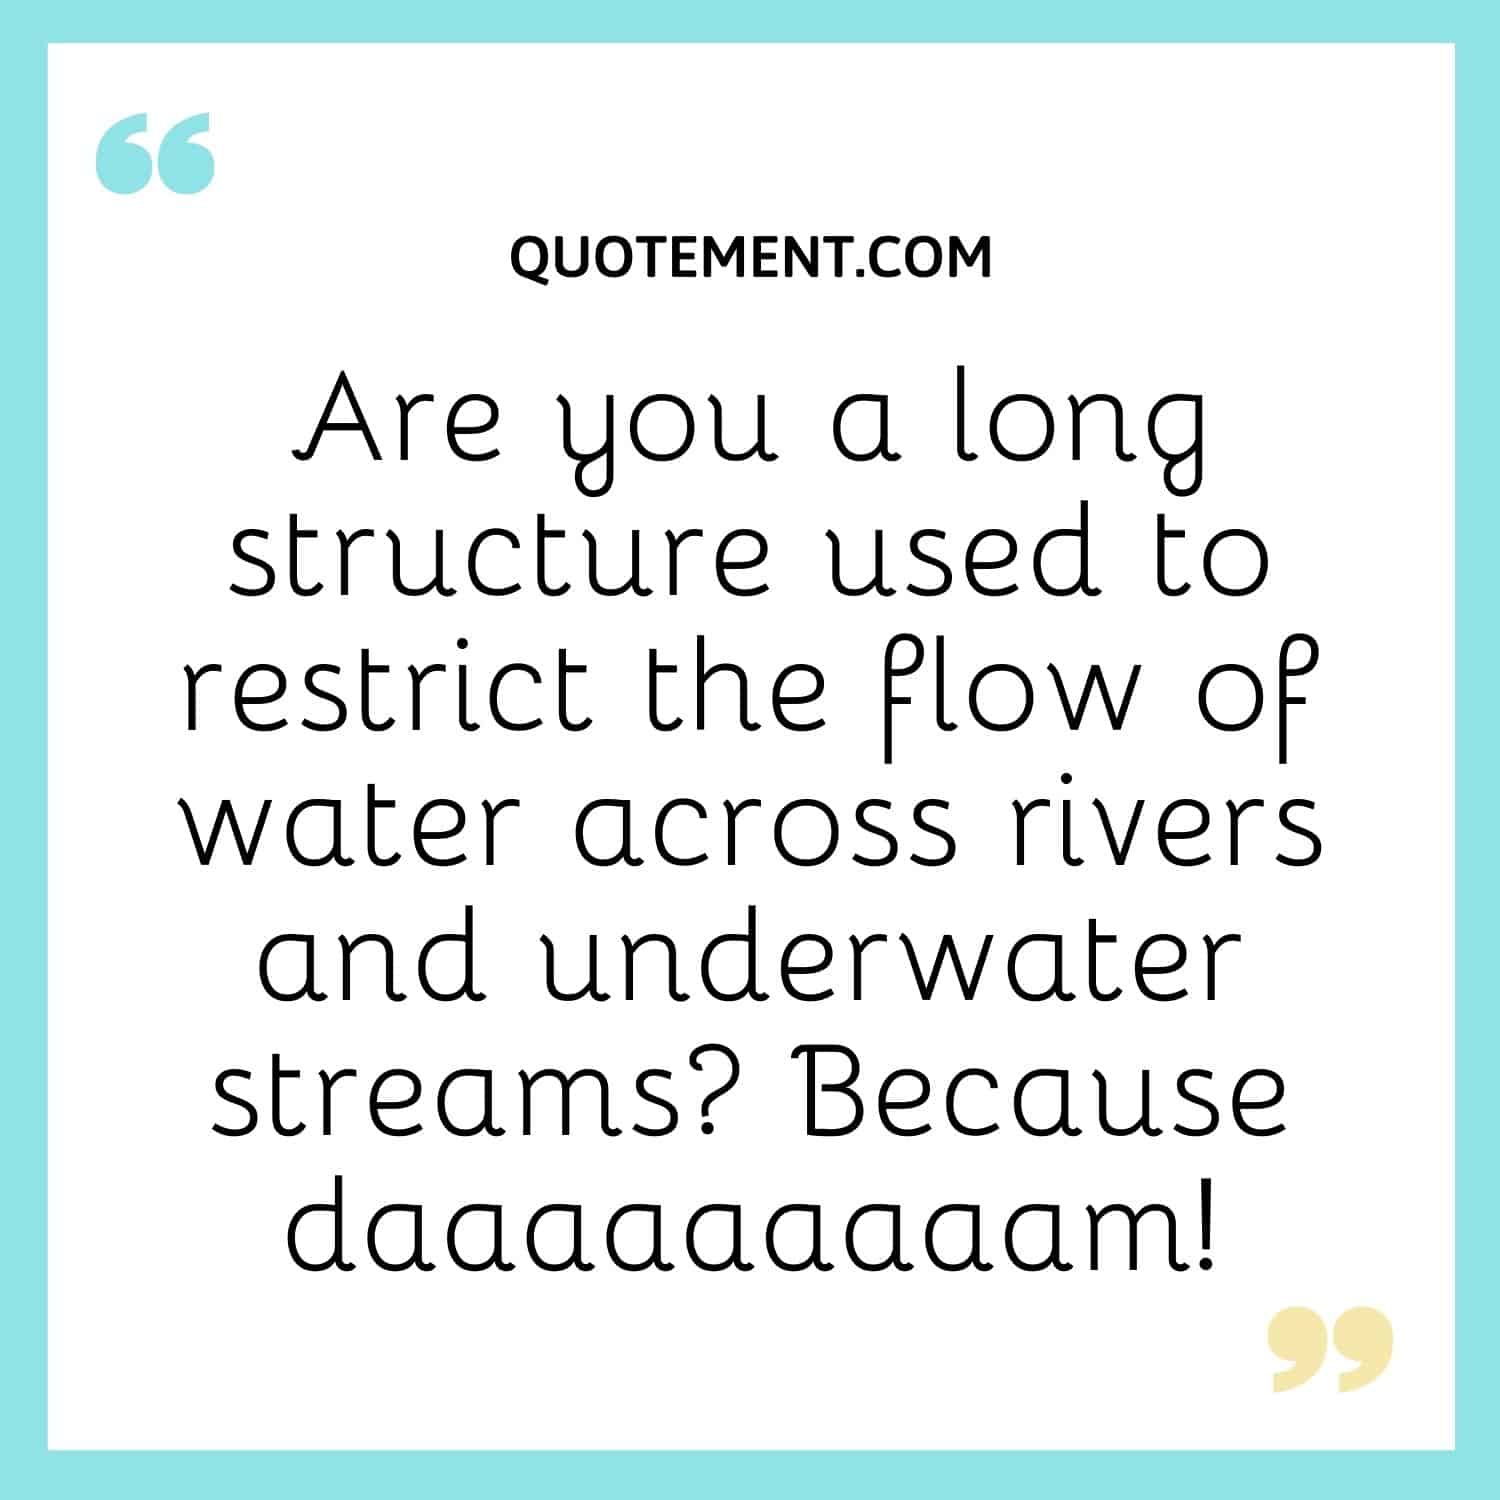 Are you a long structure used to restrict the flow of water across rivers and underwater streams Because daaaaaaaaam